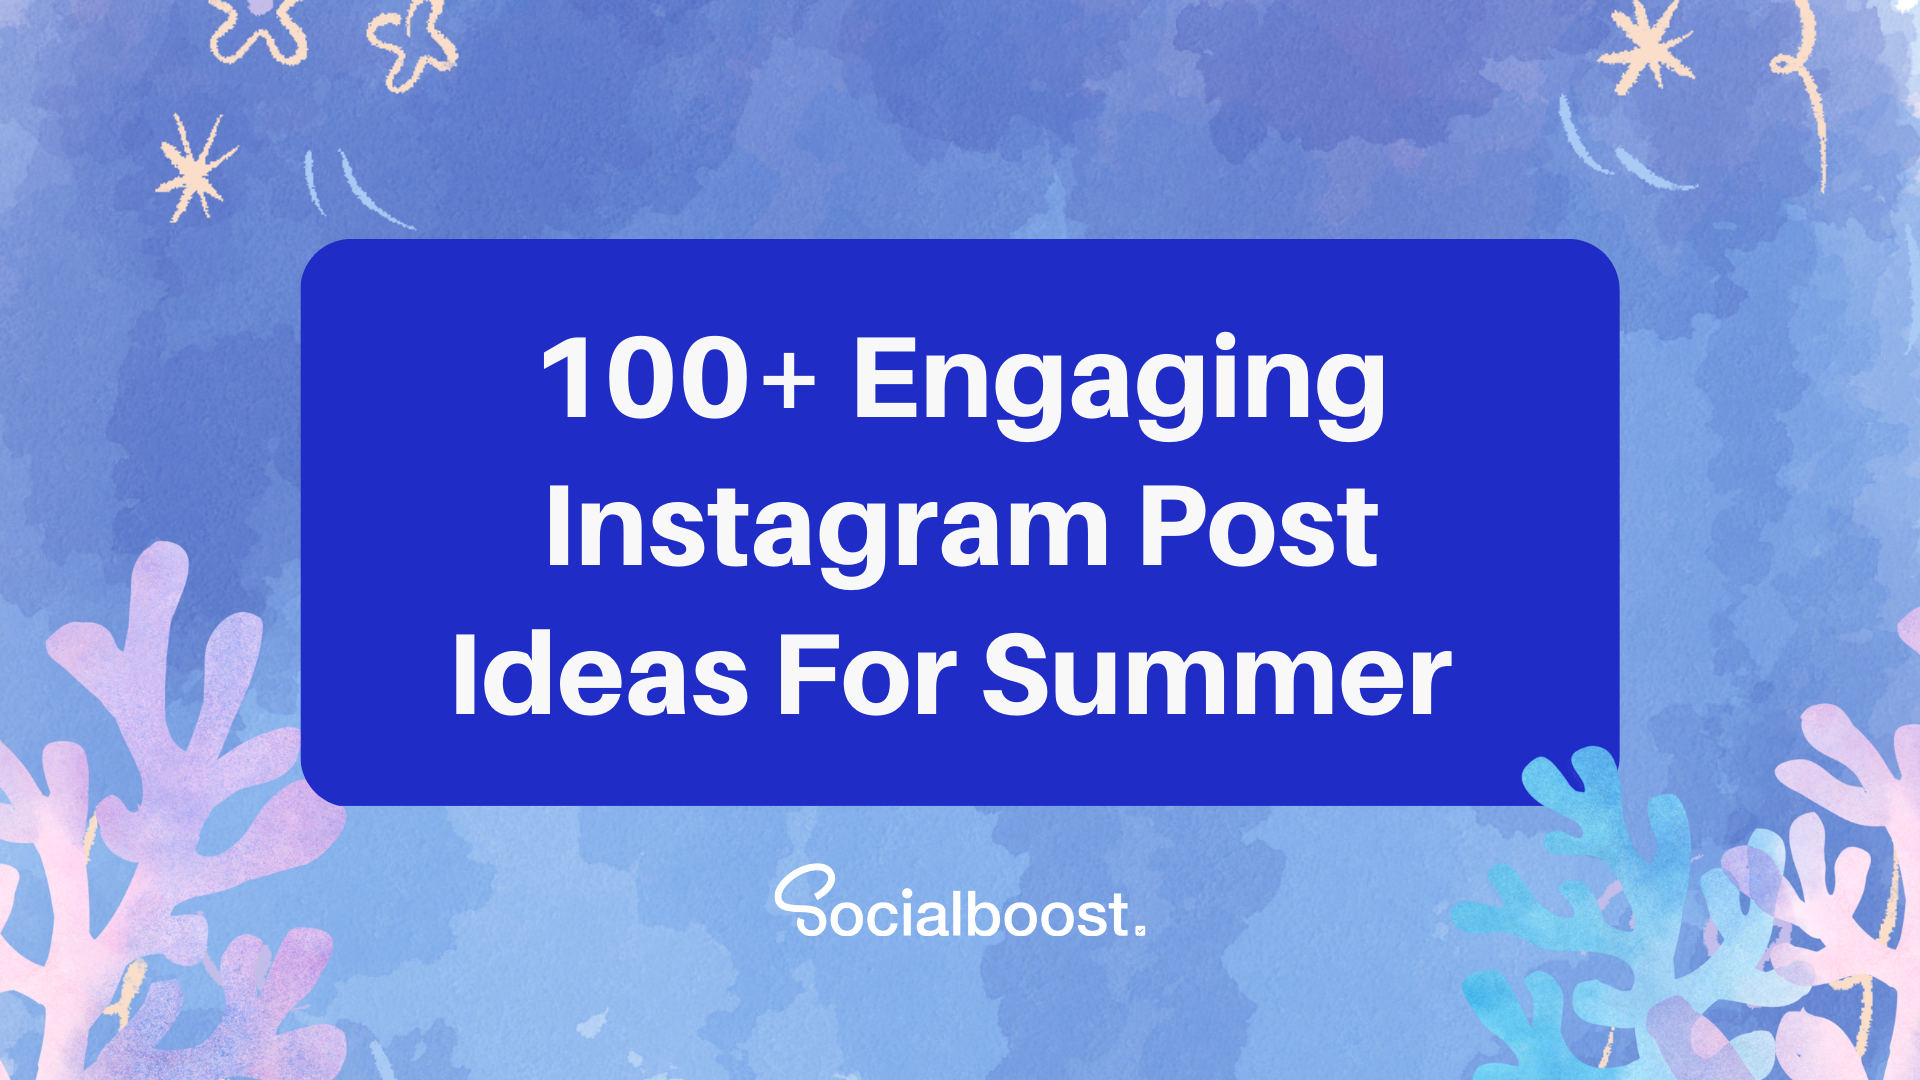 100+ Engaging Instagram Post Ideas For Summer